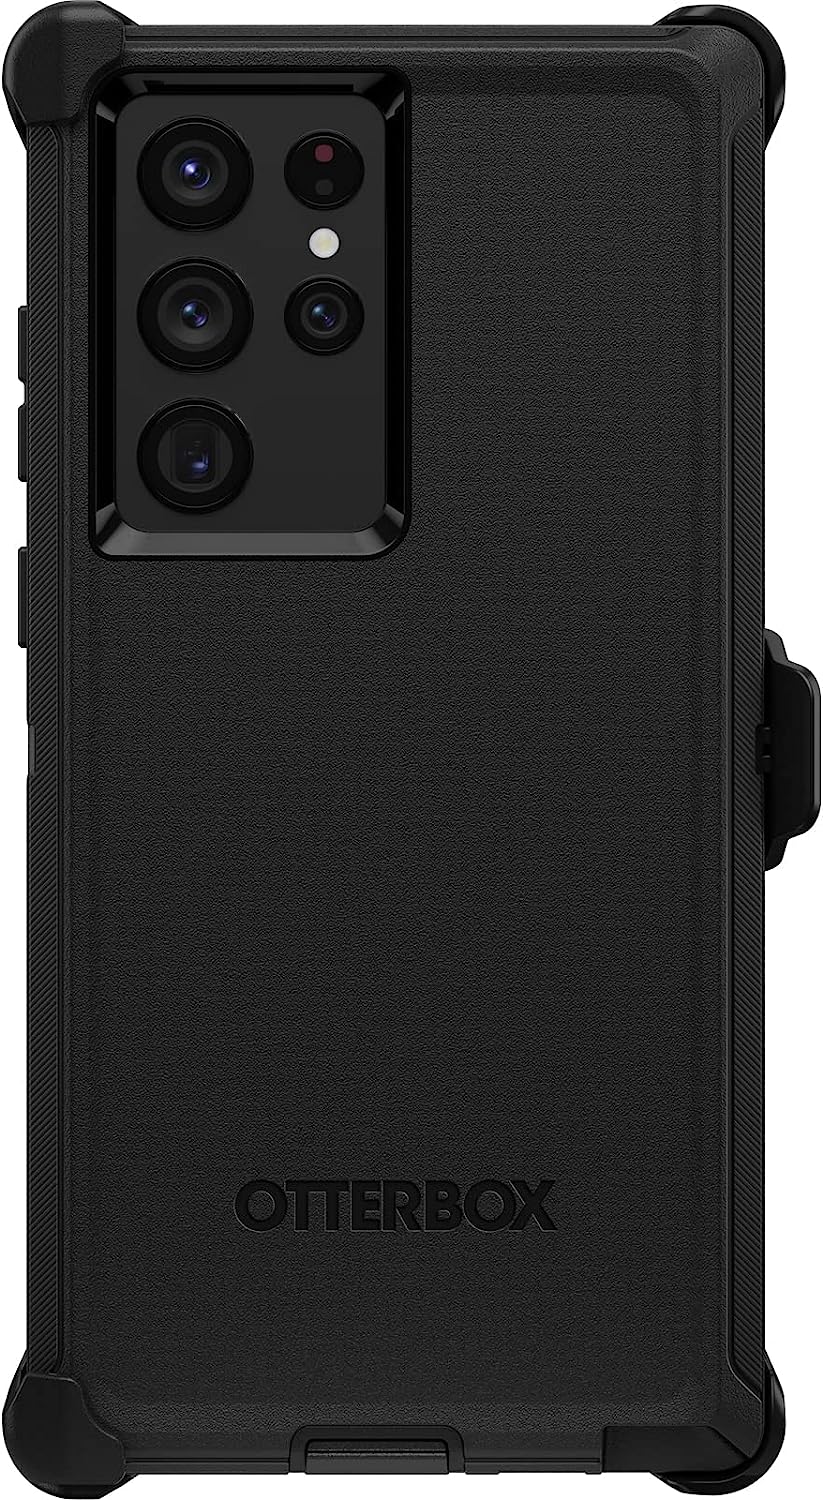 OtterBox DEFENDER SERIES Case for Samsung Galaxy S22 Ultra - Black (New)